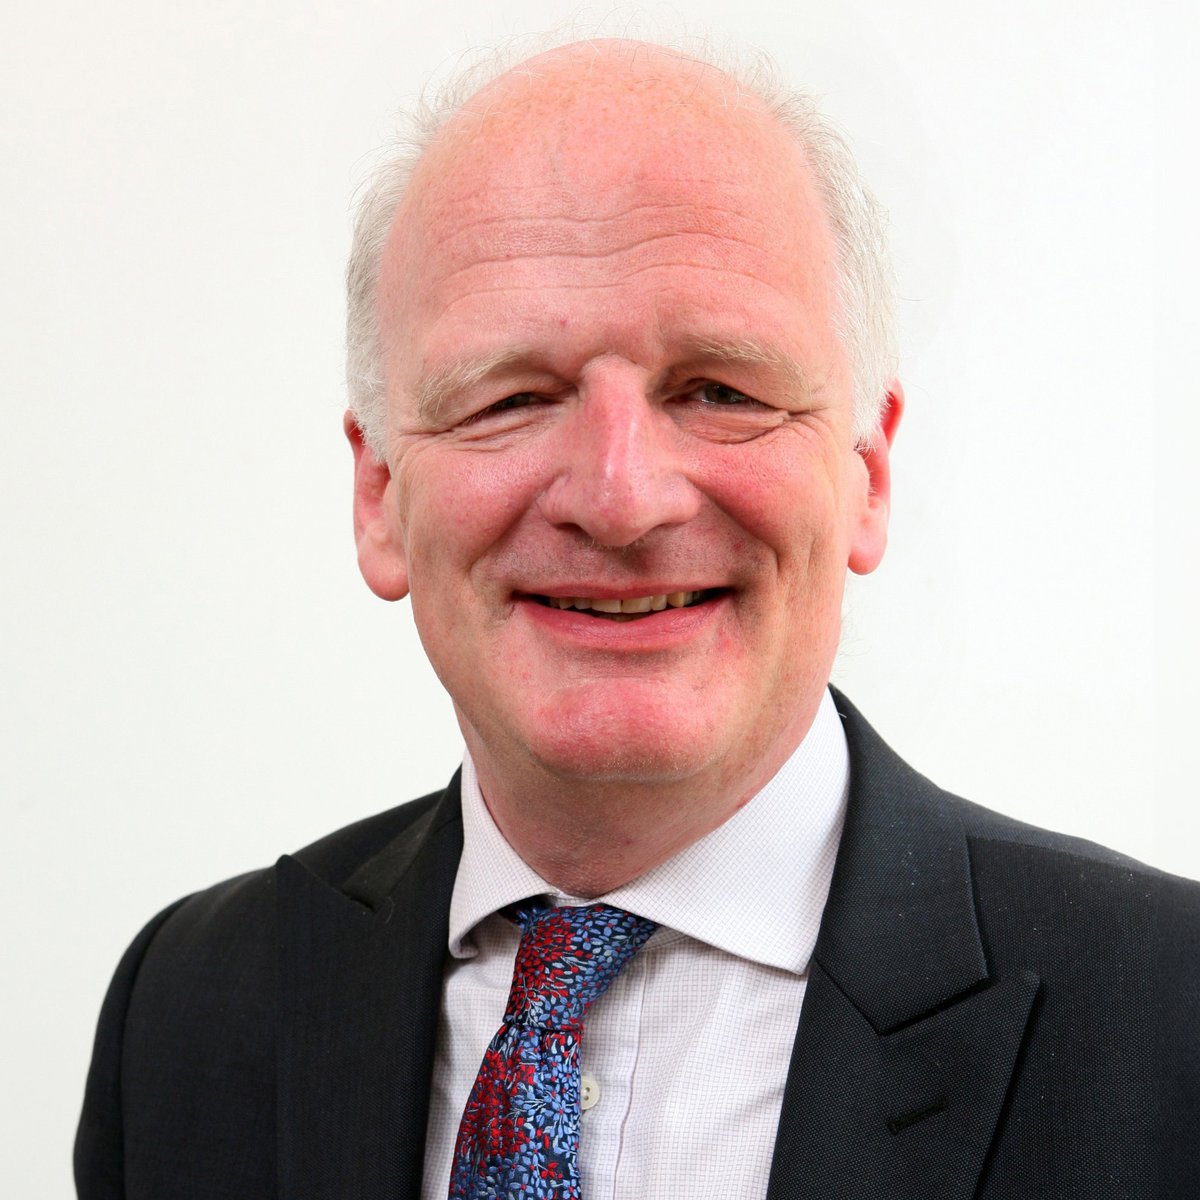 We’re pleased to announce that our Council of Governors today approved the appointment of Professor Andrew George MBE as the next Chair of Oxleas NHS Foundation Trust - a warm welcome from all of us.